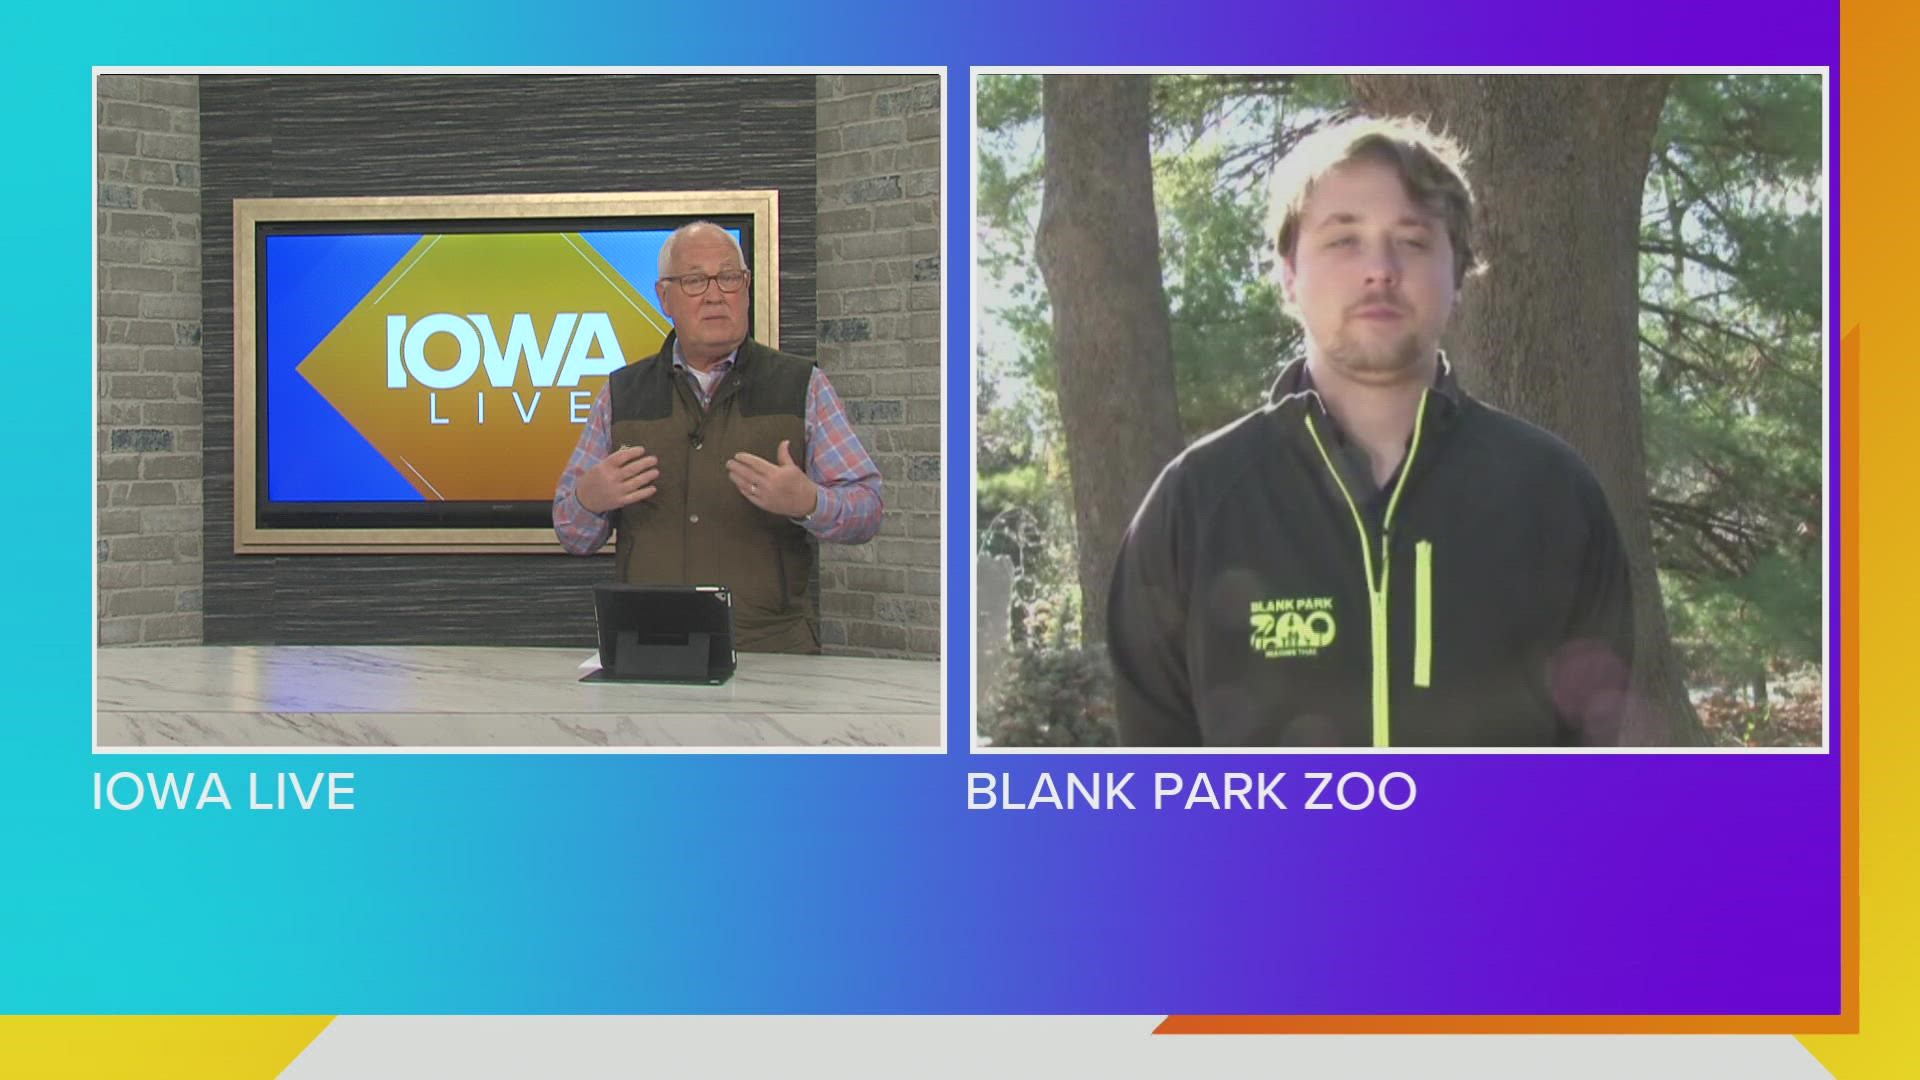 Colin Muehleisen with the Blank Park Zoo shares with guest host Terry Rich some great holiday gift ideas that last all year!